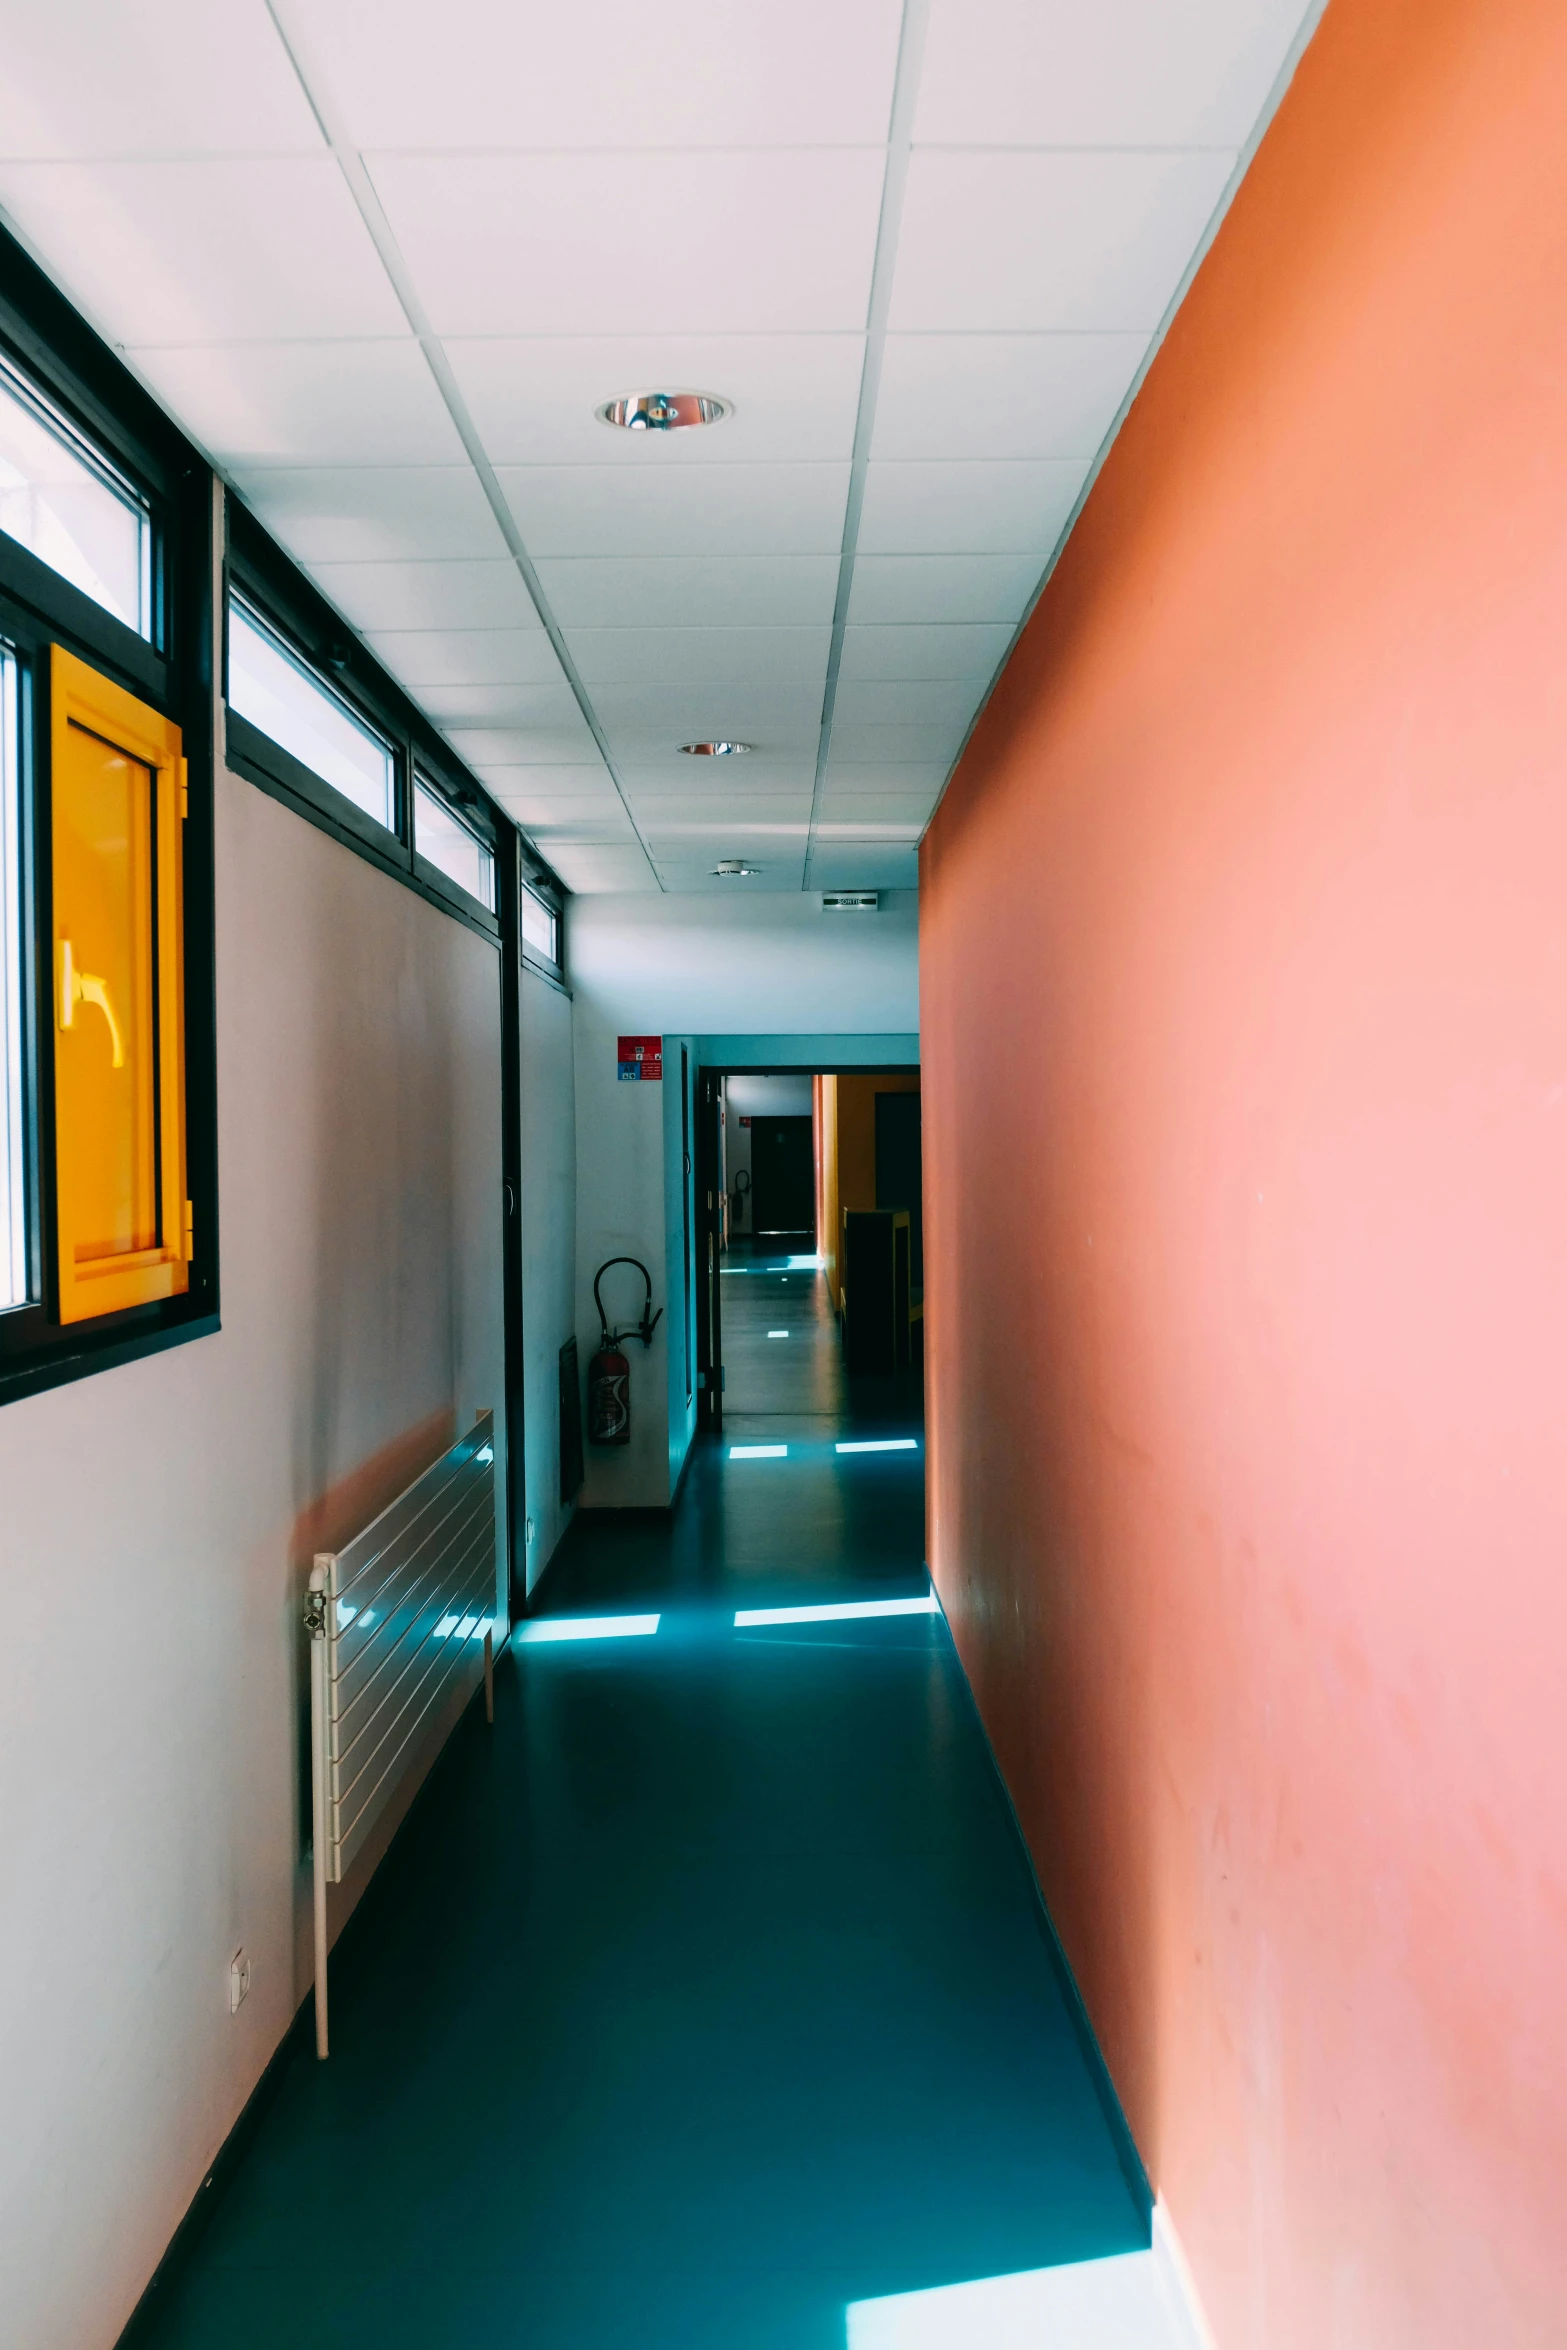 the corridor in the office building is brightly lit by the window and the sky